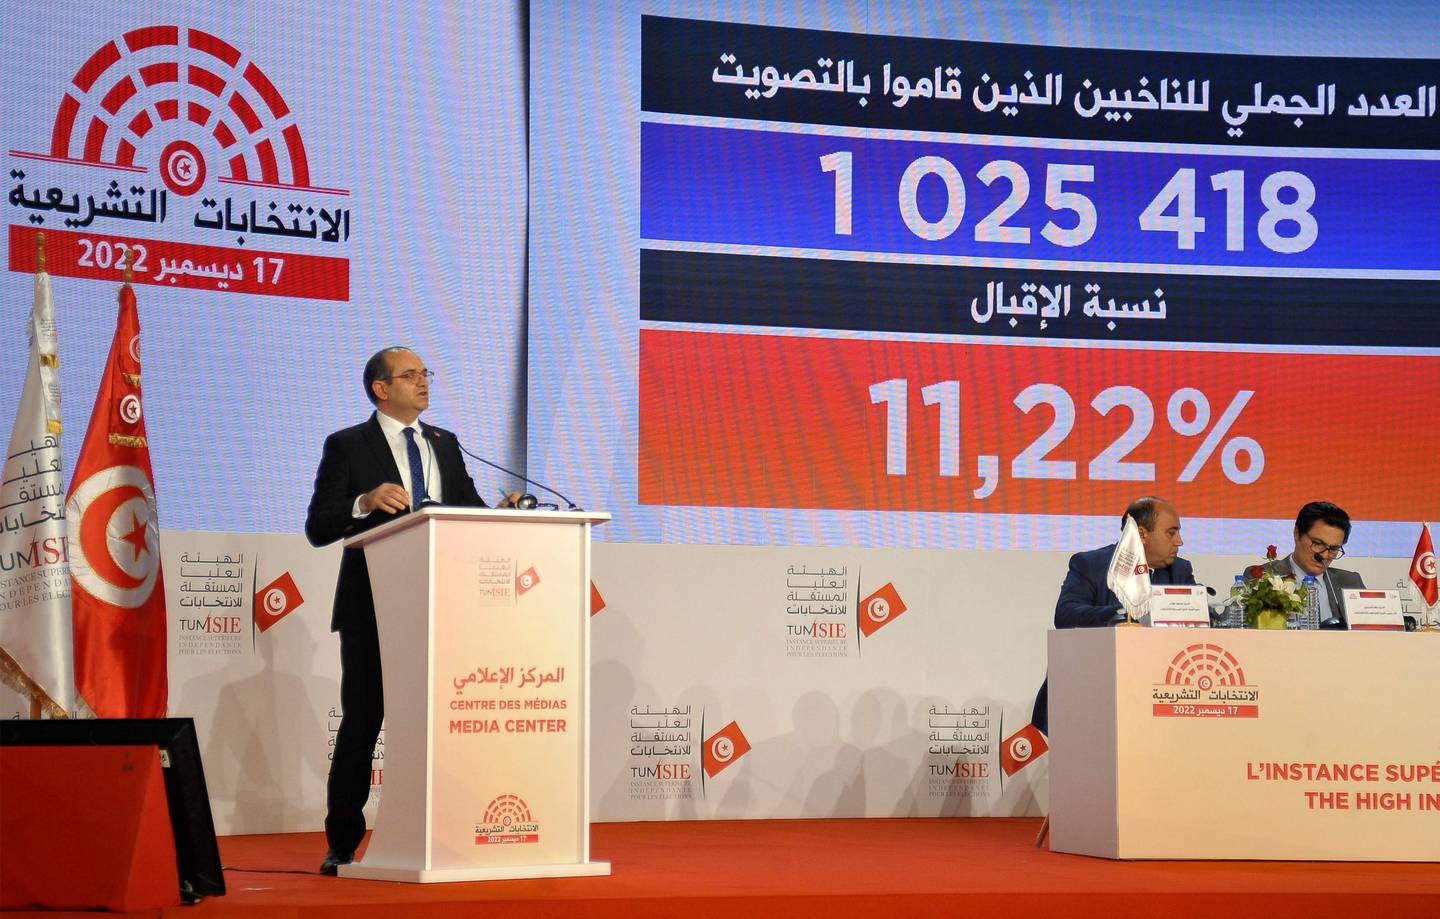 Tunisia's electoral board president Farouk Bouasker announces the preliminary results of the December 19 parliamentary elections. AFP